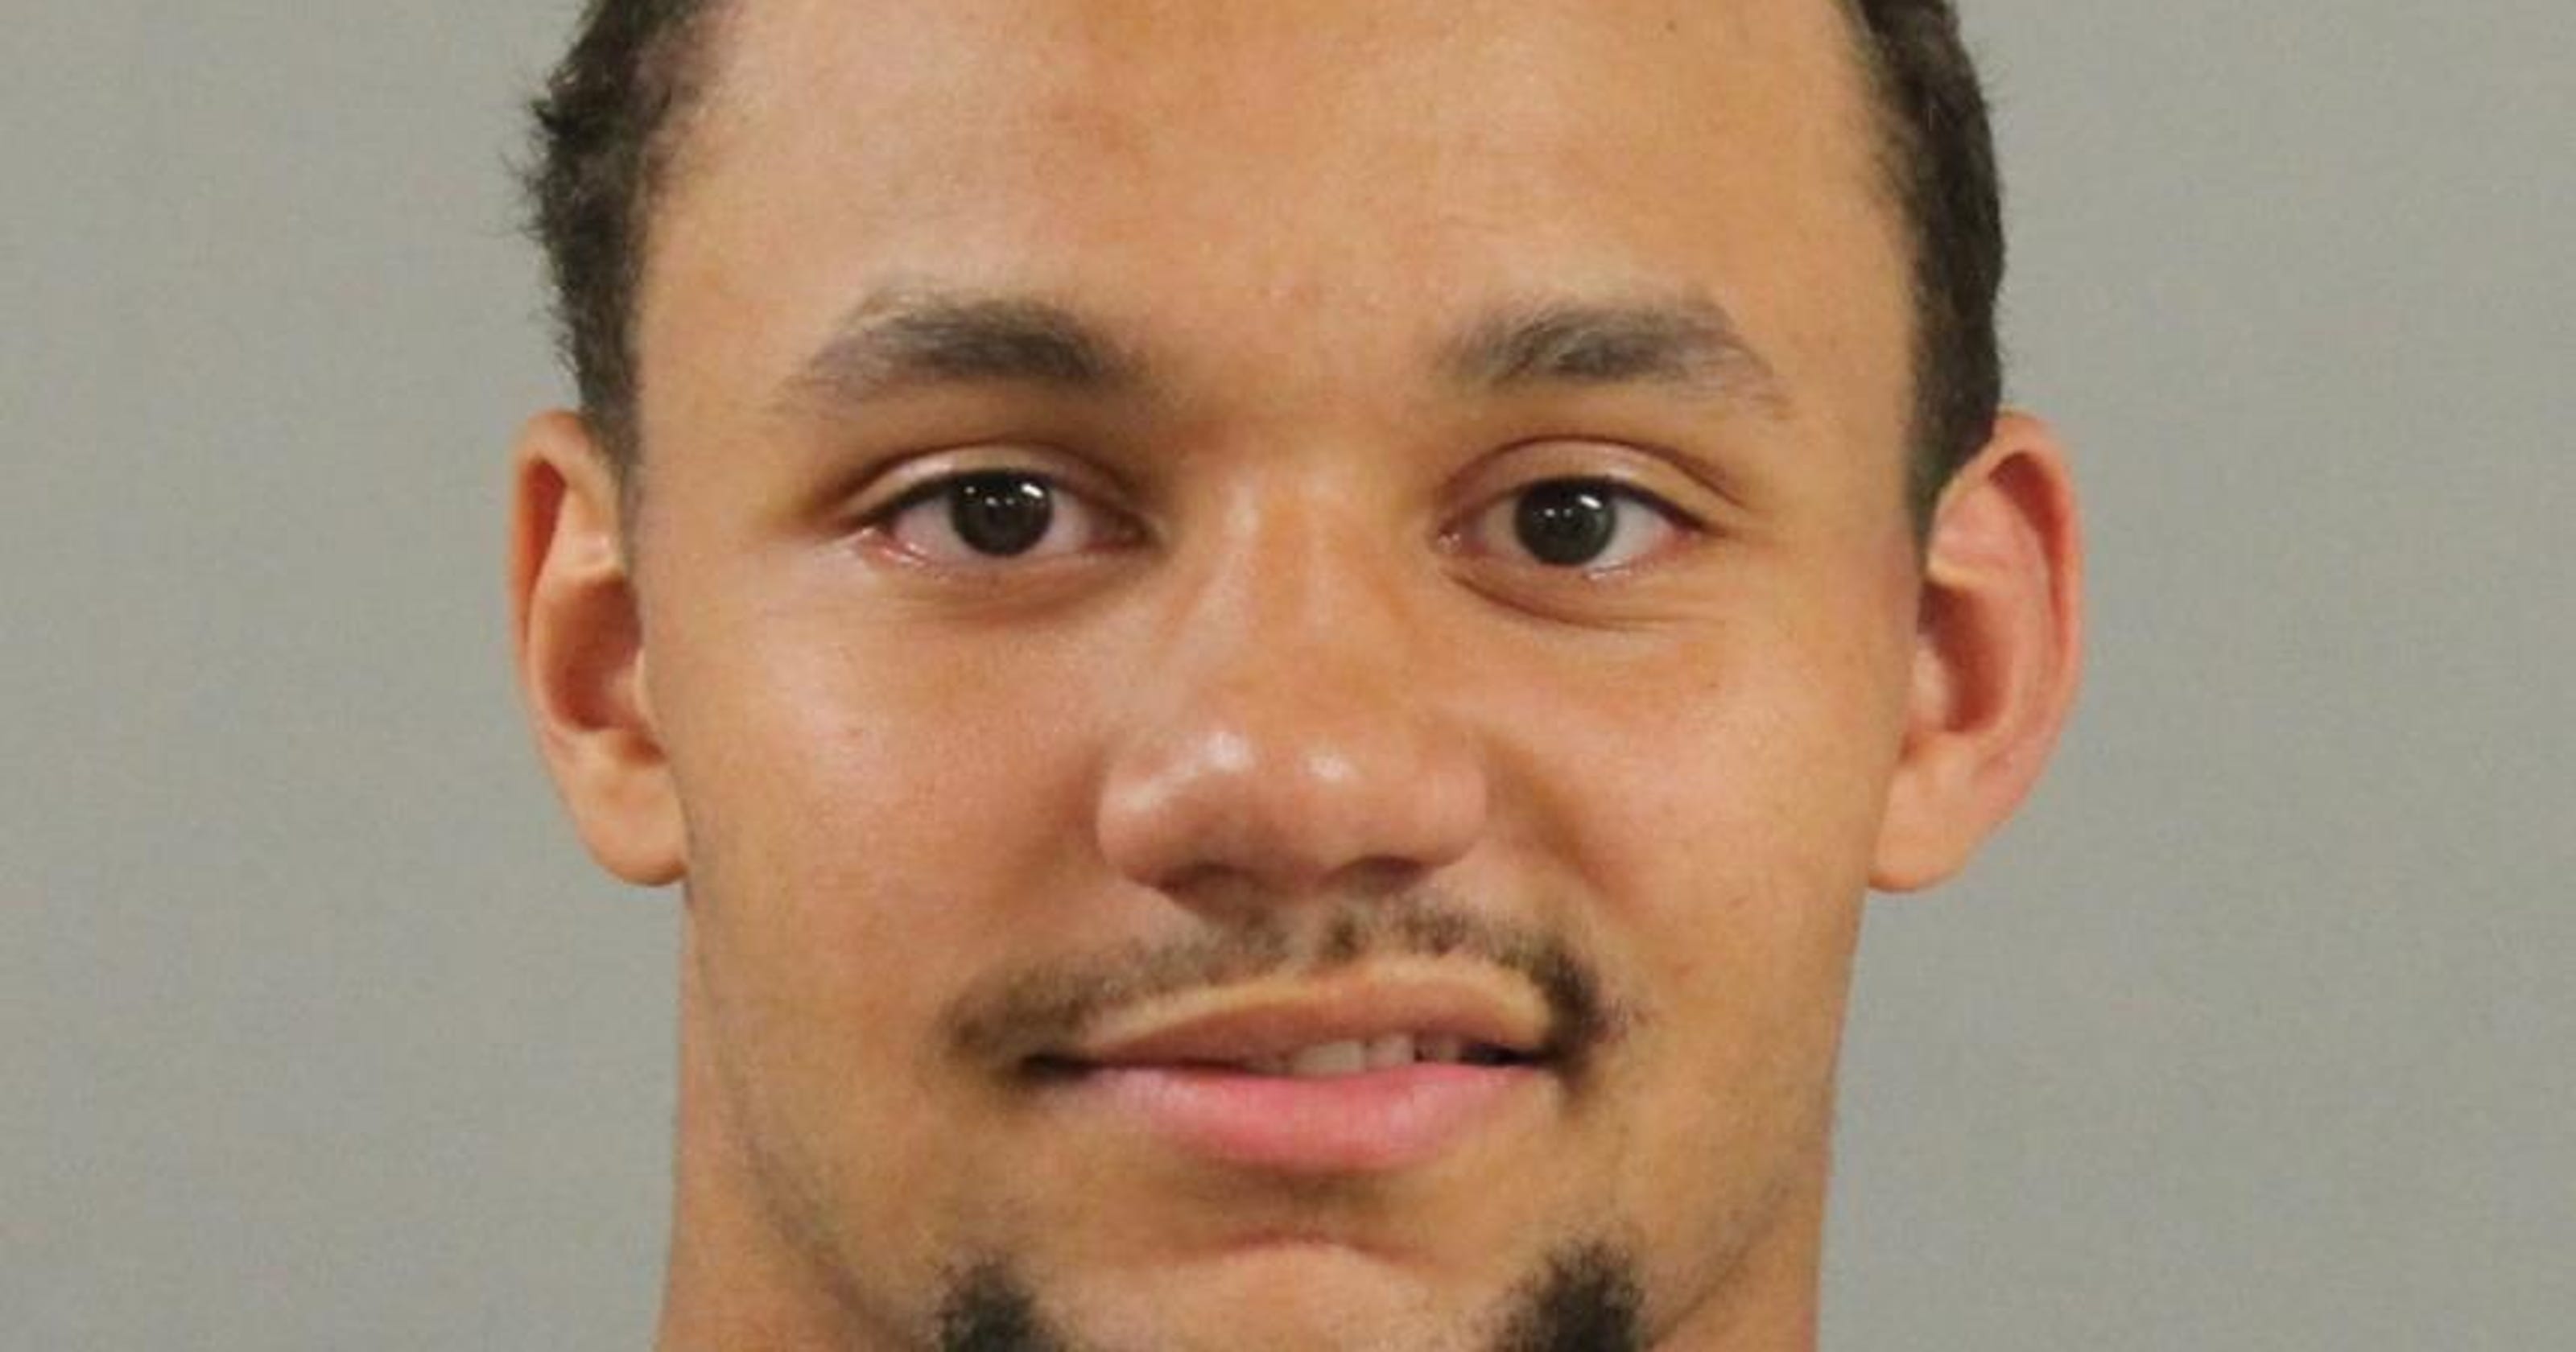 UM football player charged with sexual assault in East Lansing